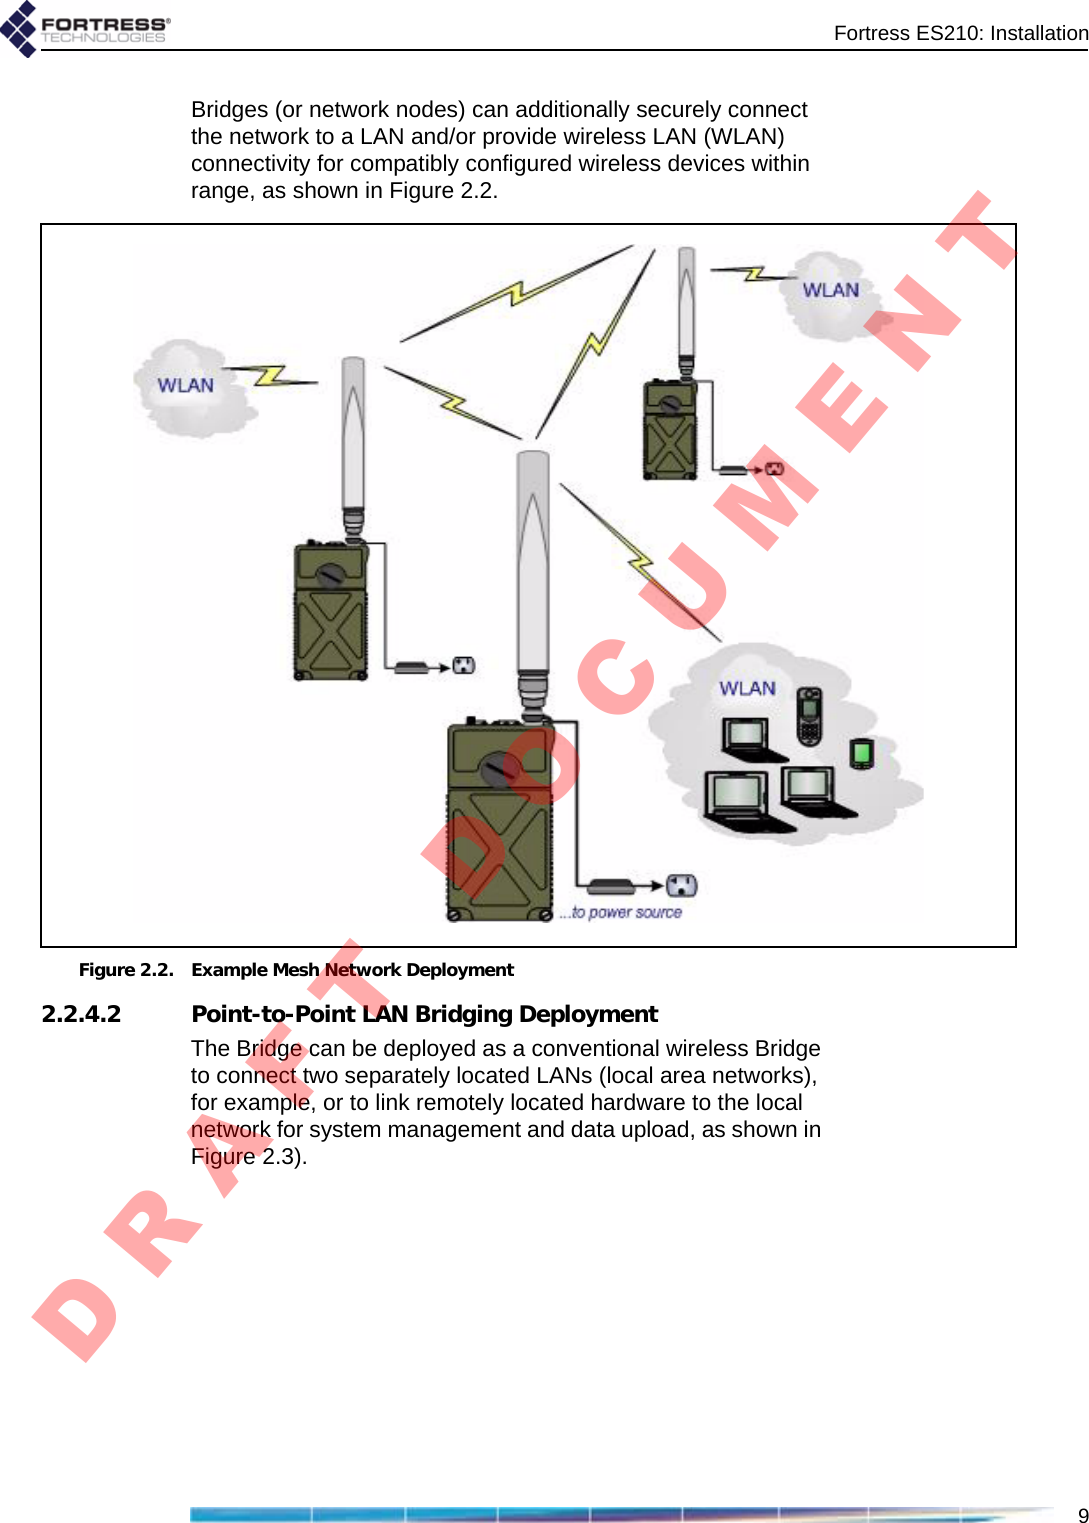 Fortress ES210: Installation9Bridges (or network nodes) can additionally securely connect the network to a LAN and/or provide wireless LAN (WLAN) connectivity for compatibly configured wireless devices within range, as shown in Figure 2.2.Figure 2.2. Example Mesh Network Deployment2.2.4.2 Point-to-Point LAN Bridging DeploymentThe Bridge can be deployed as a conventional wireless Bridge to connect two separately located LANs (local area networks), for example, or to link remotely located hardware to the local network for system management and data upload, as shown in Figure 2.3).D R A F T   D O C U M E N T